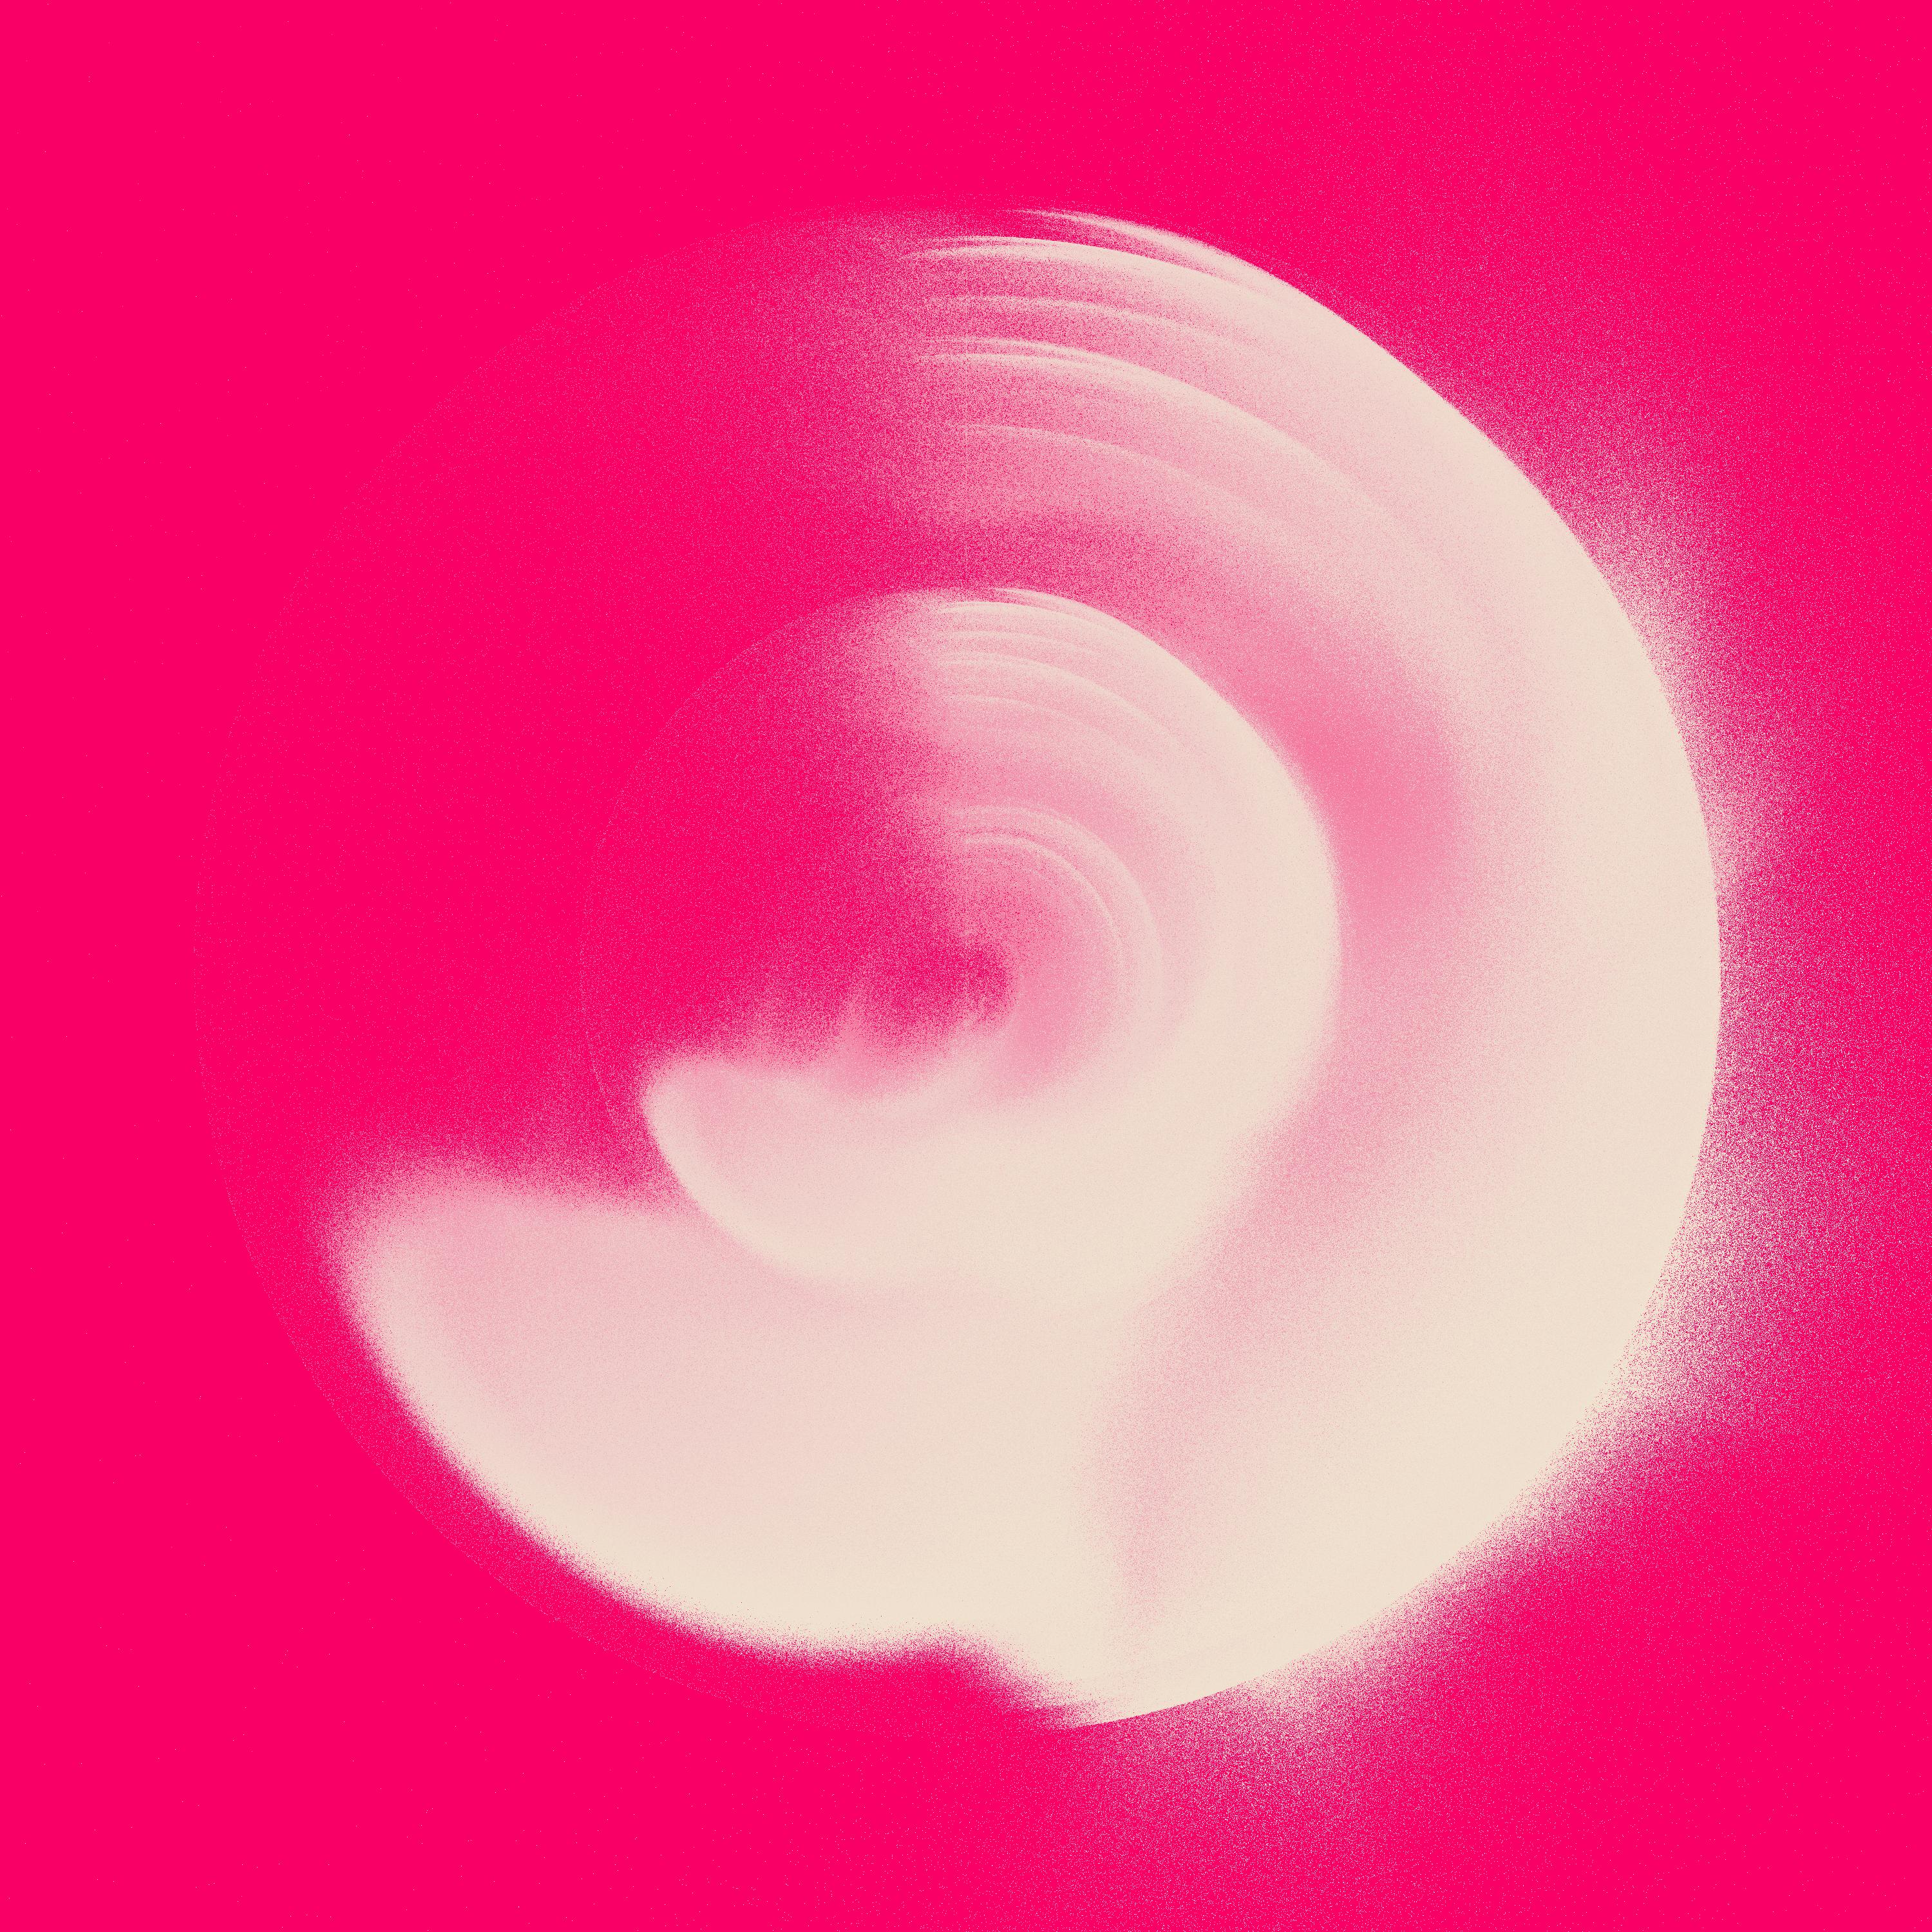 swirling white grainy patterns in a three-quarter circular arc, against a pink background